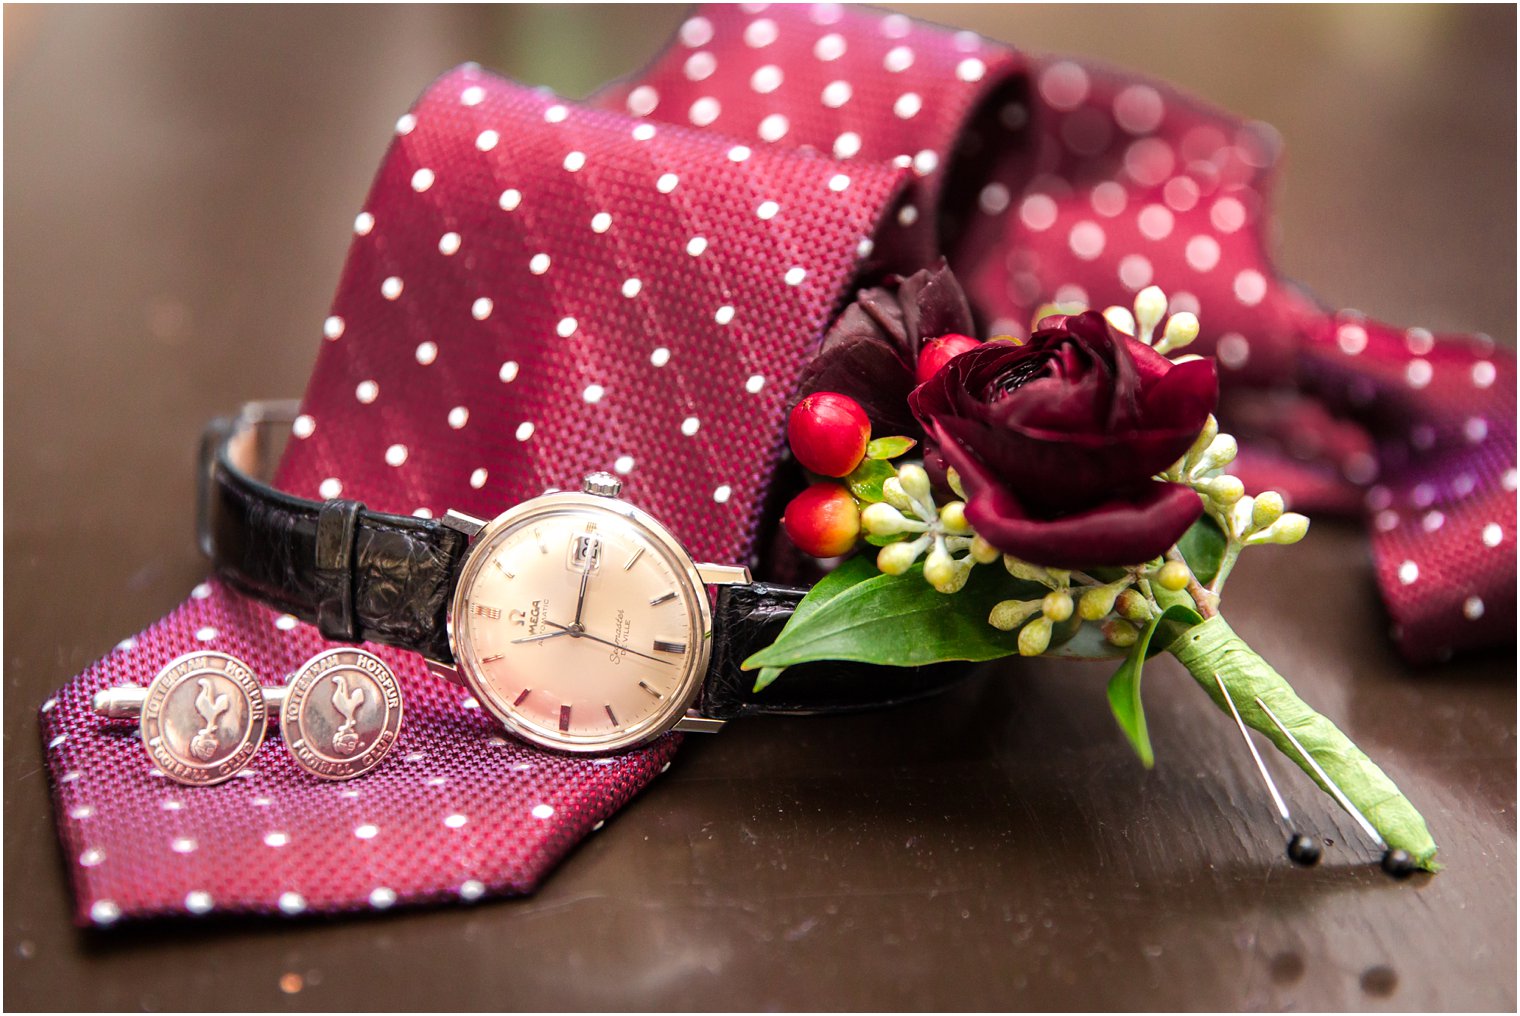 Burgundy tie with polka dots and burgundy boutonniere